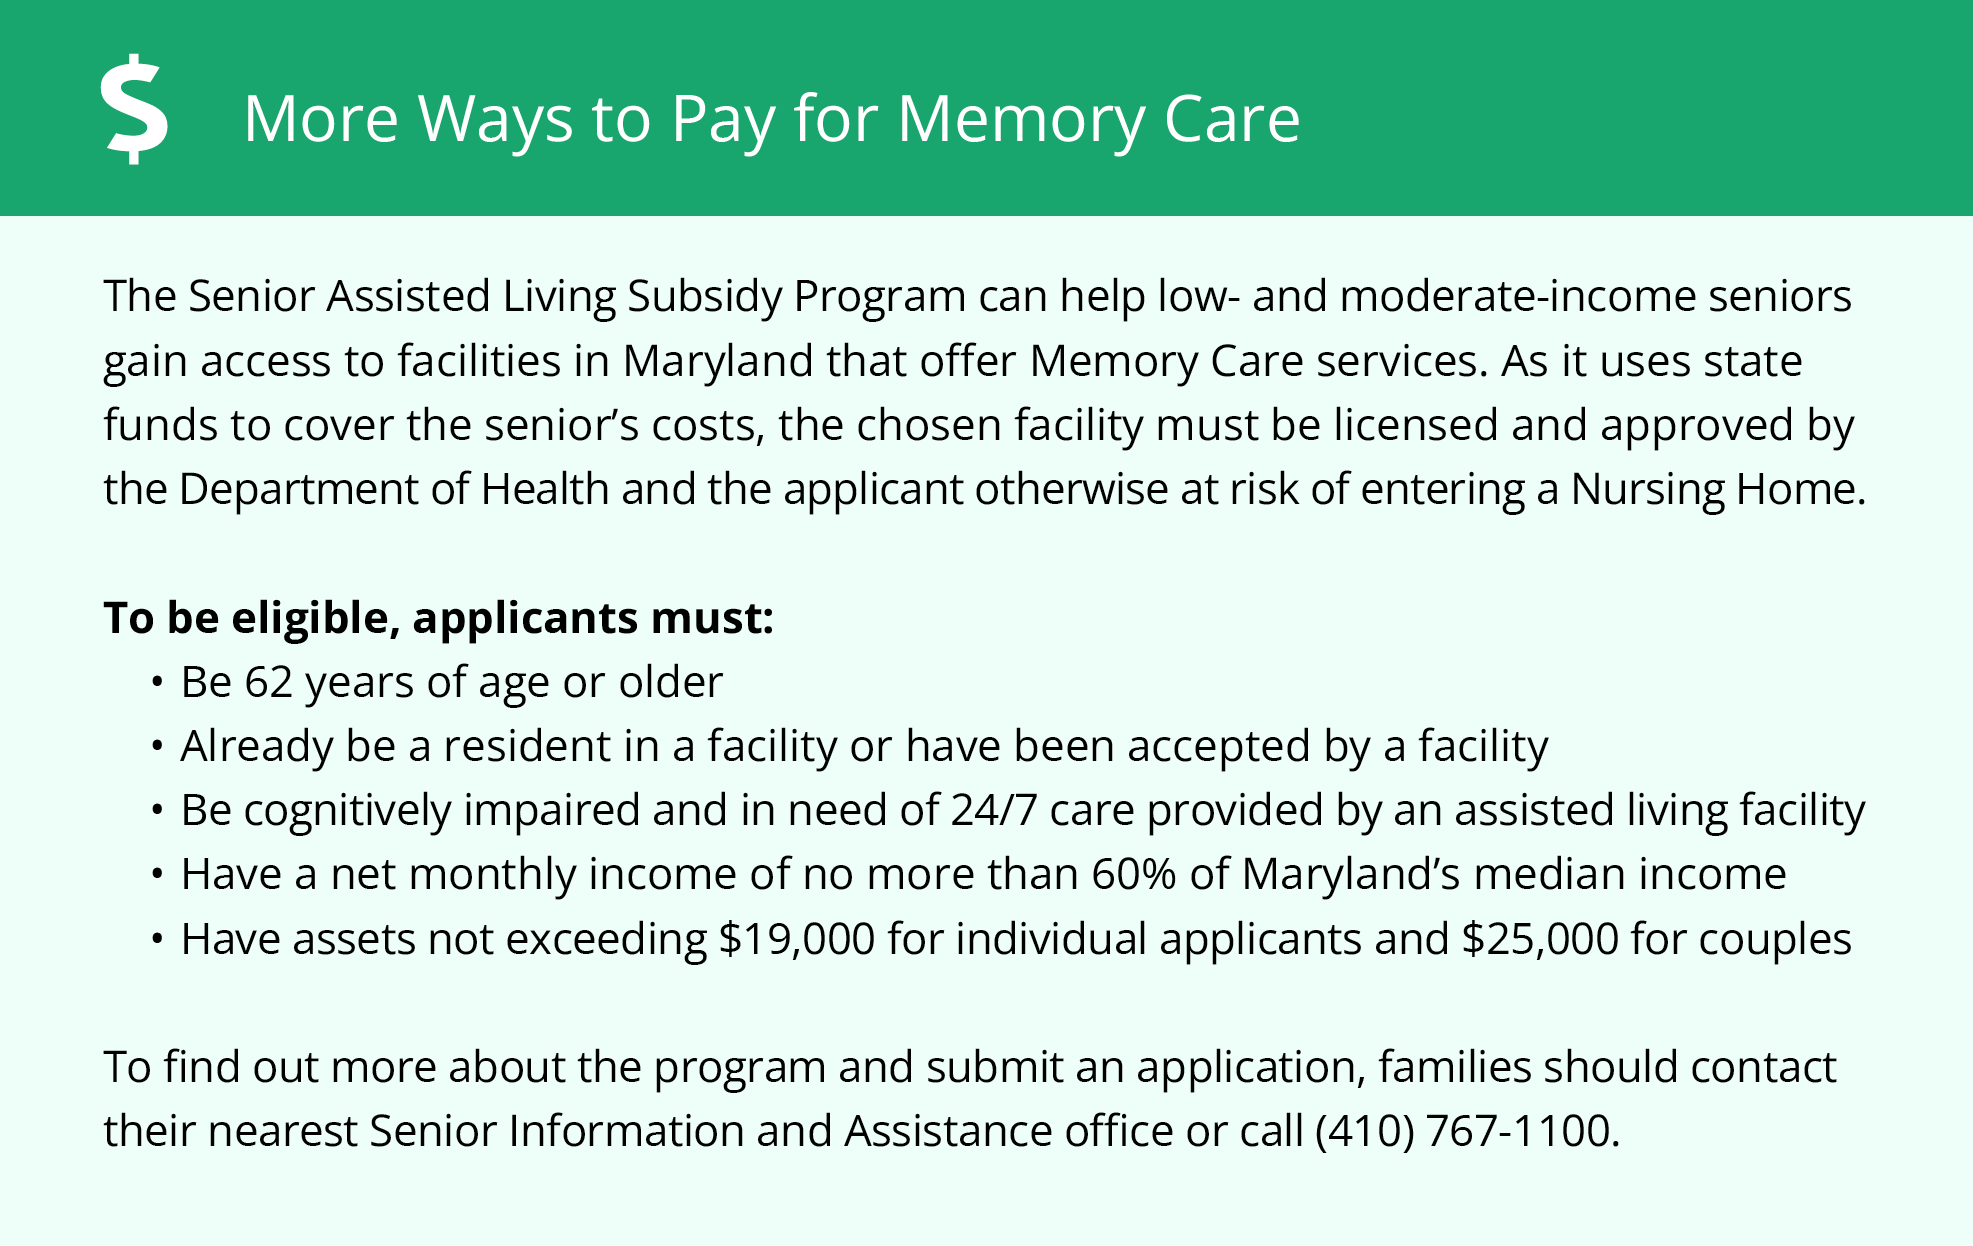 Financial Assistance for Memory Care in Maryland